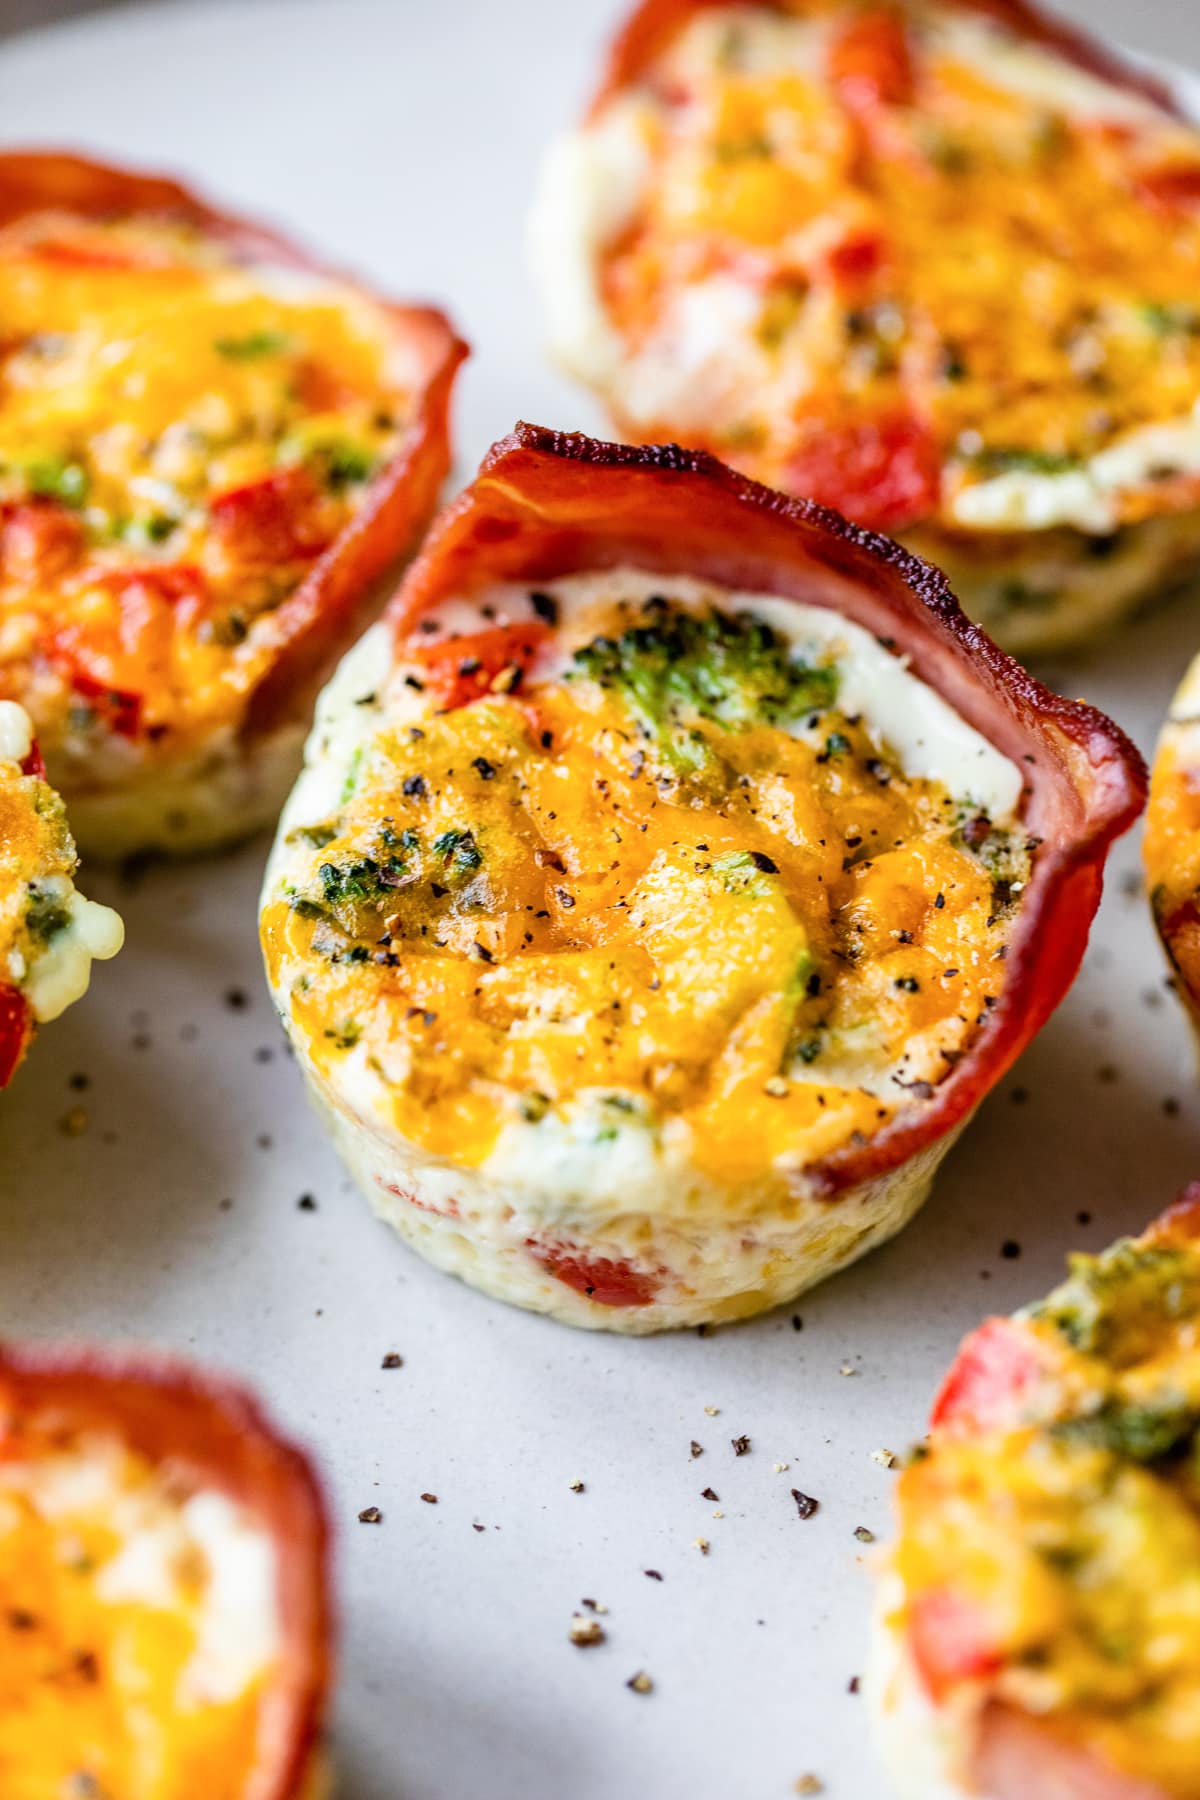 High Protein Egg White Cups with Veggies and Turkey Bacon